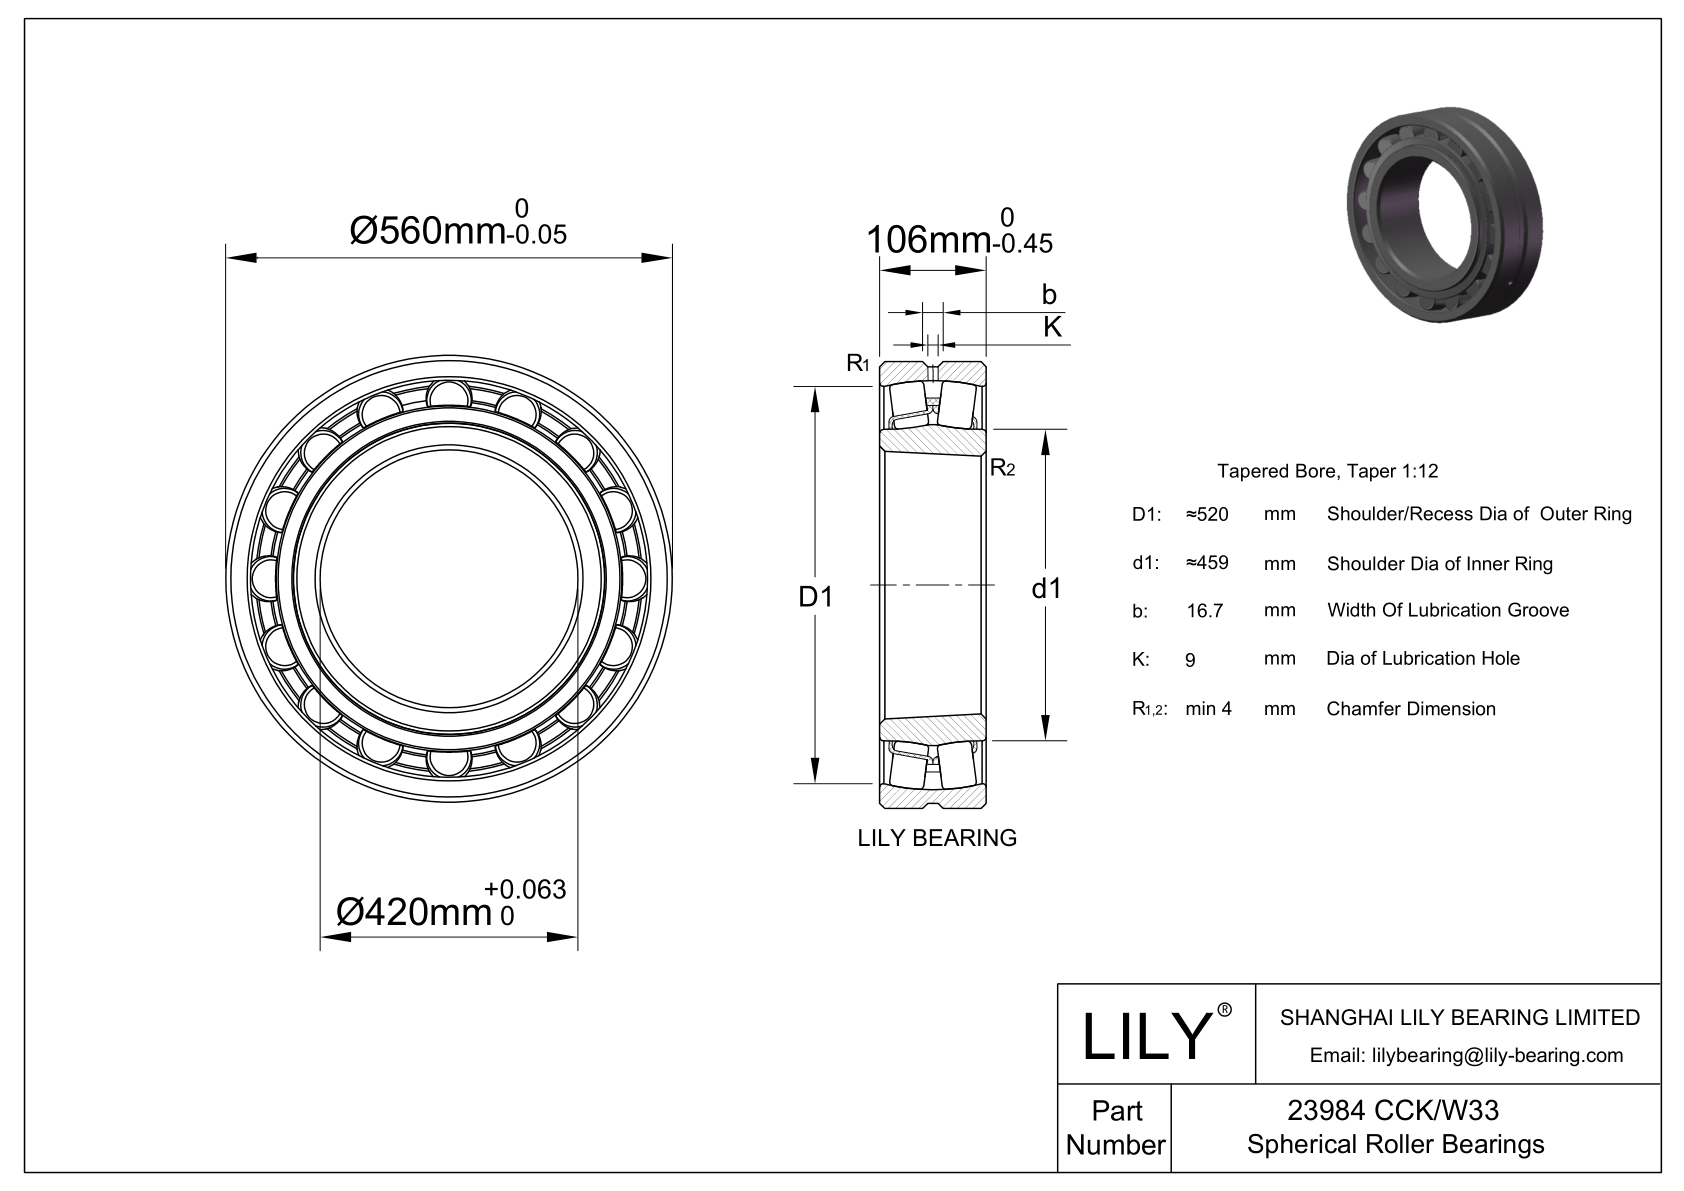 23984 CCK/W33 Double Row Spherical Roller Bearing cad drawing